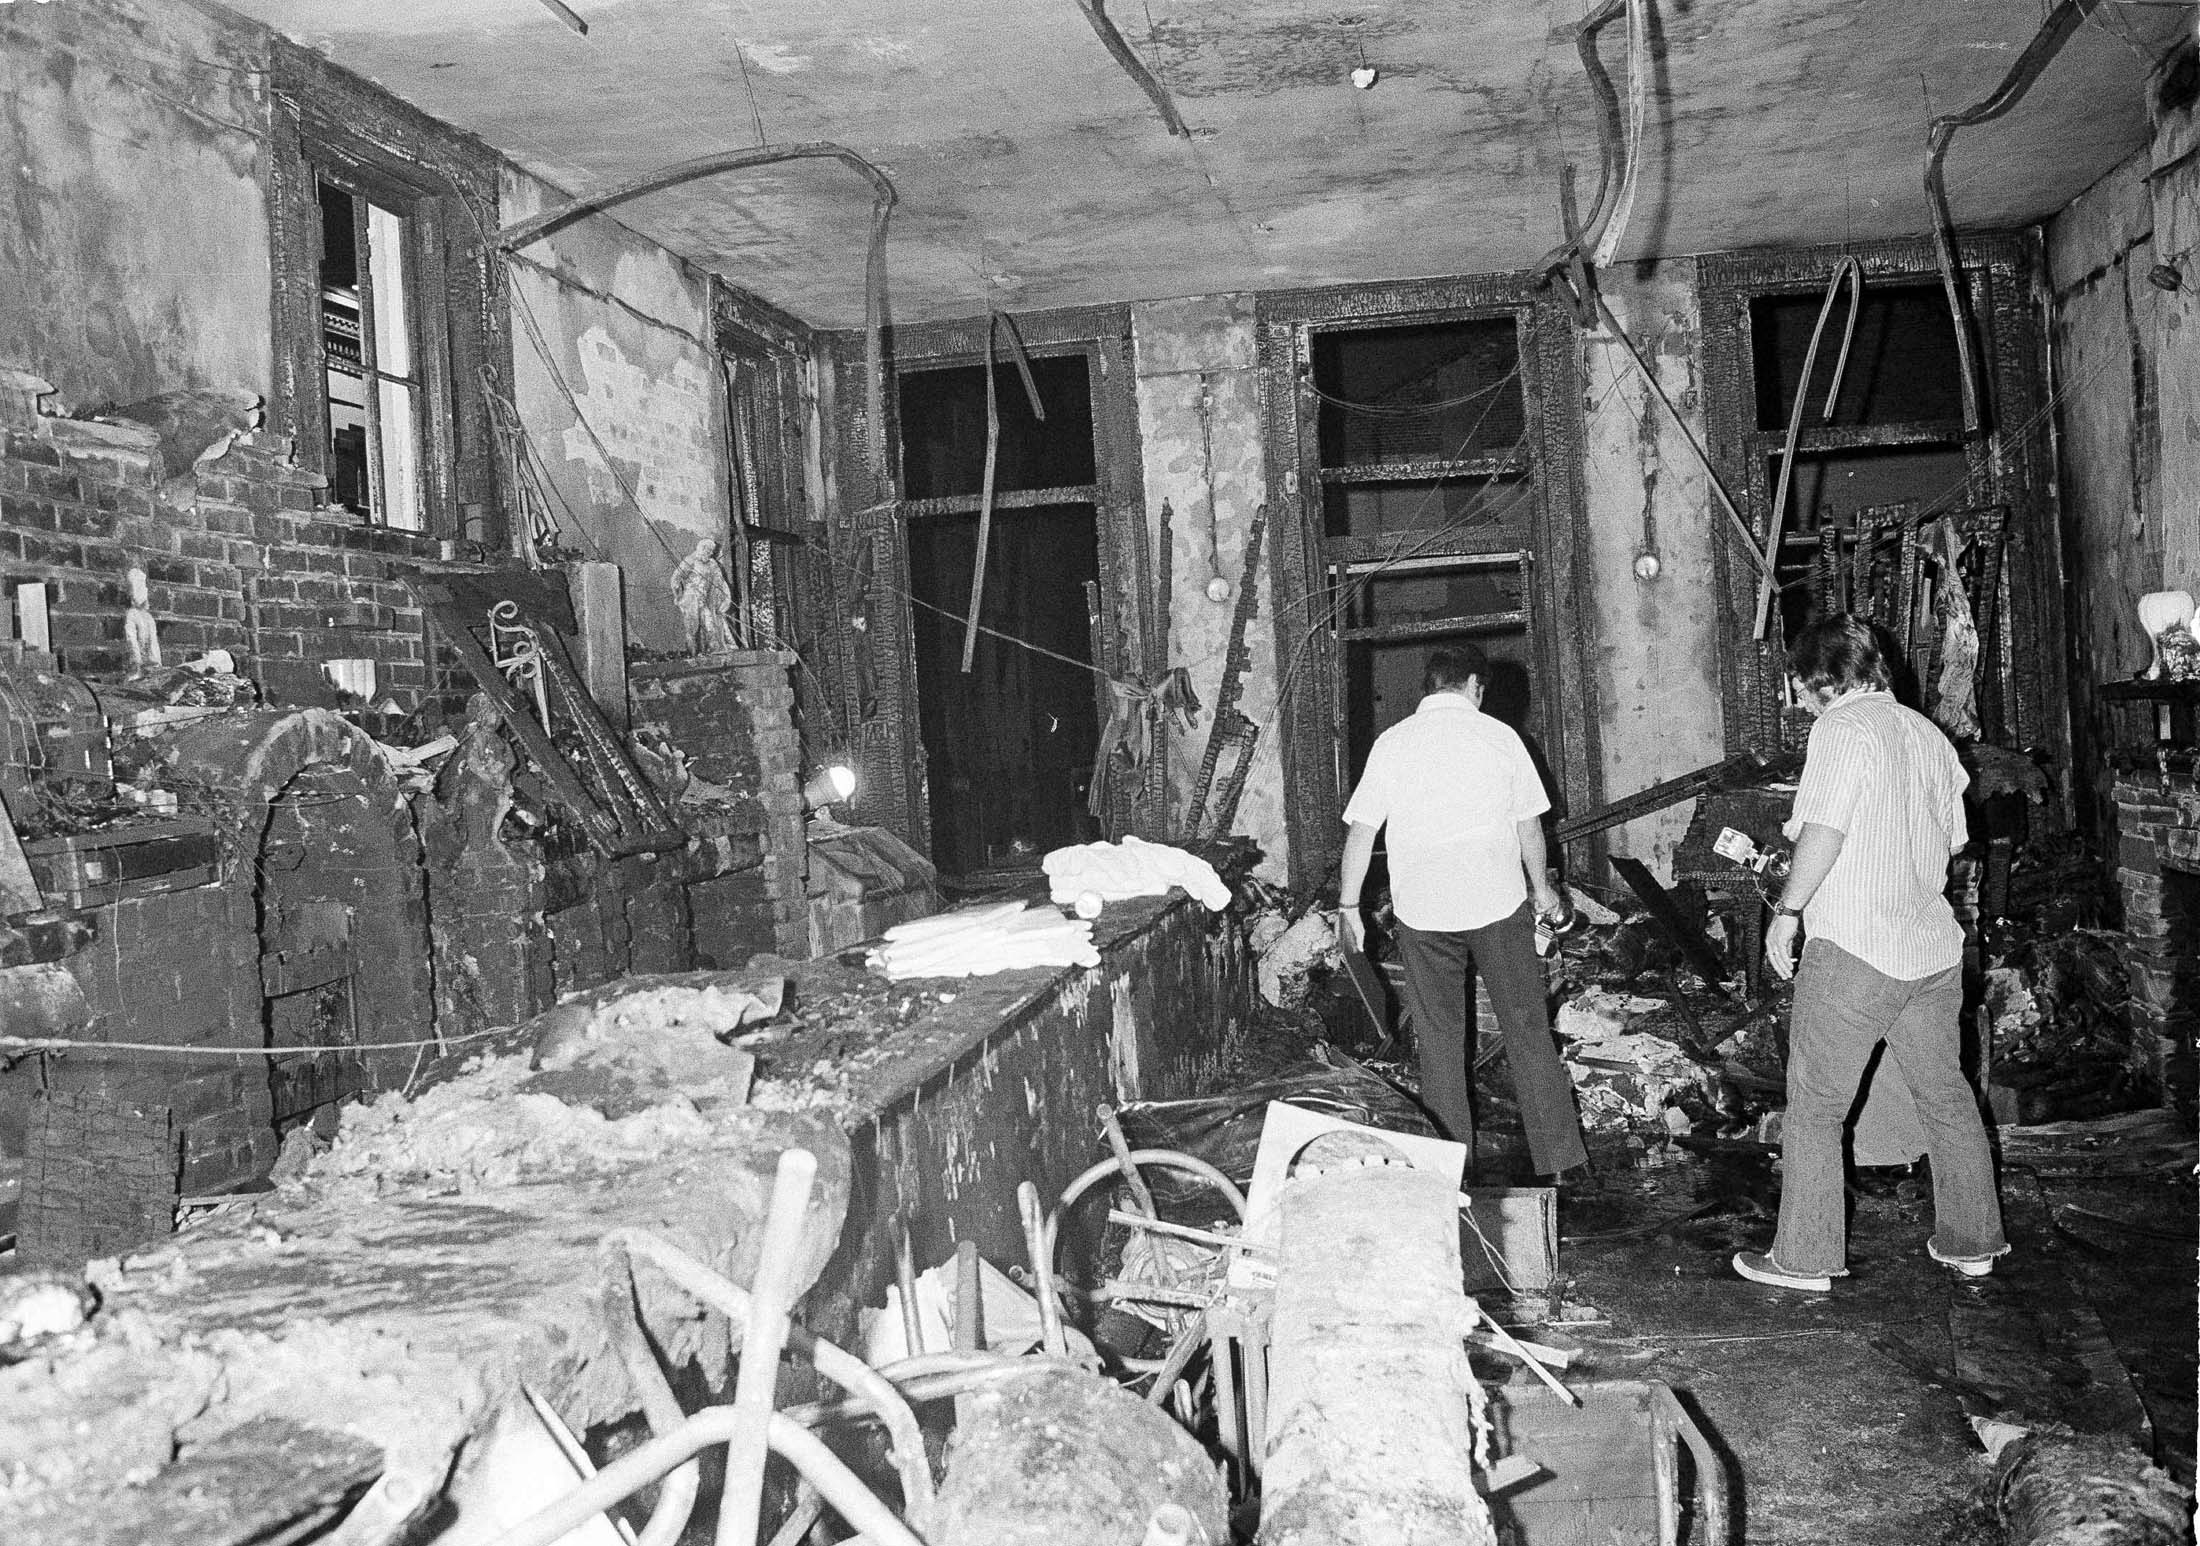 This is a view inside the UpStairs bar following a flash fire that left 29 dead and 15 injured, June 25, 1973. Most of the victims were found near the windows in the background. The bar is located in the New Orleans French Quarter. (Jack Thornell—AP)